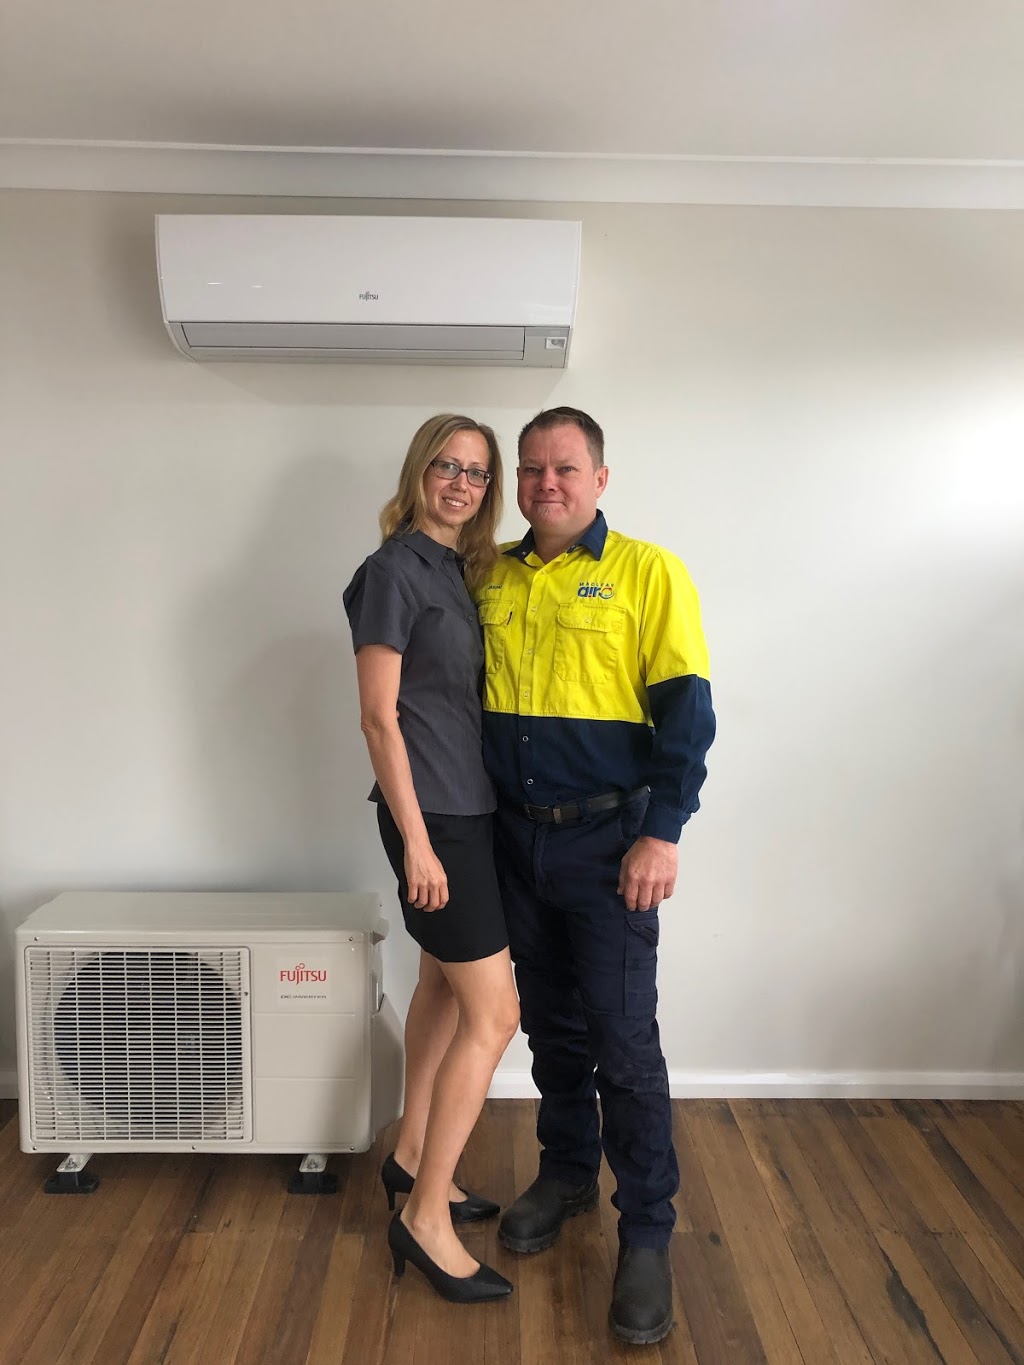 Macleay Air - Air Conditioning and Refrigeration | 53 Cameron Street (Corner, 24HR COMMERCIAL BREAKDOWN SERVICE, Becke St, Kempsey NSW 2440, Australia | Phone: (02) 6562 3380